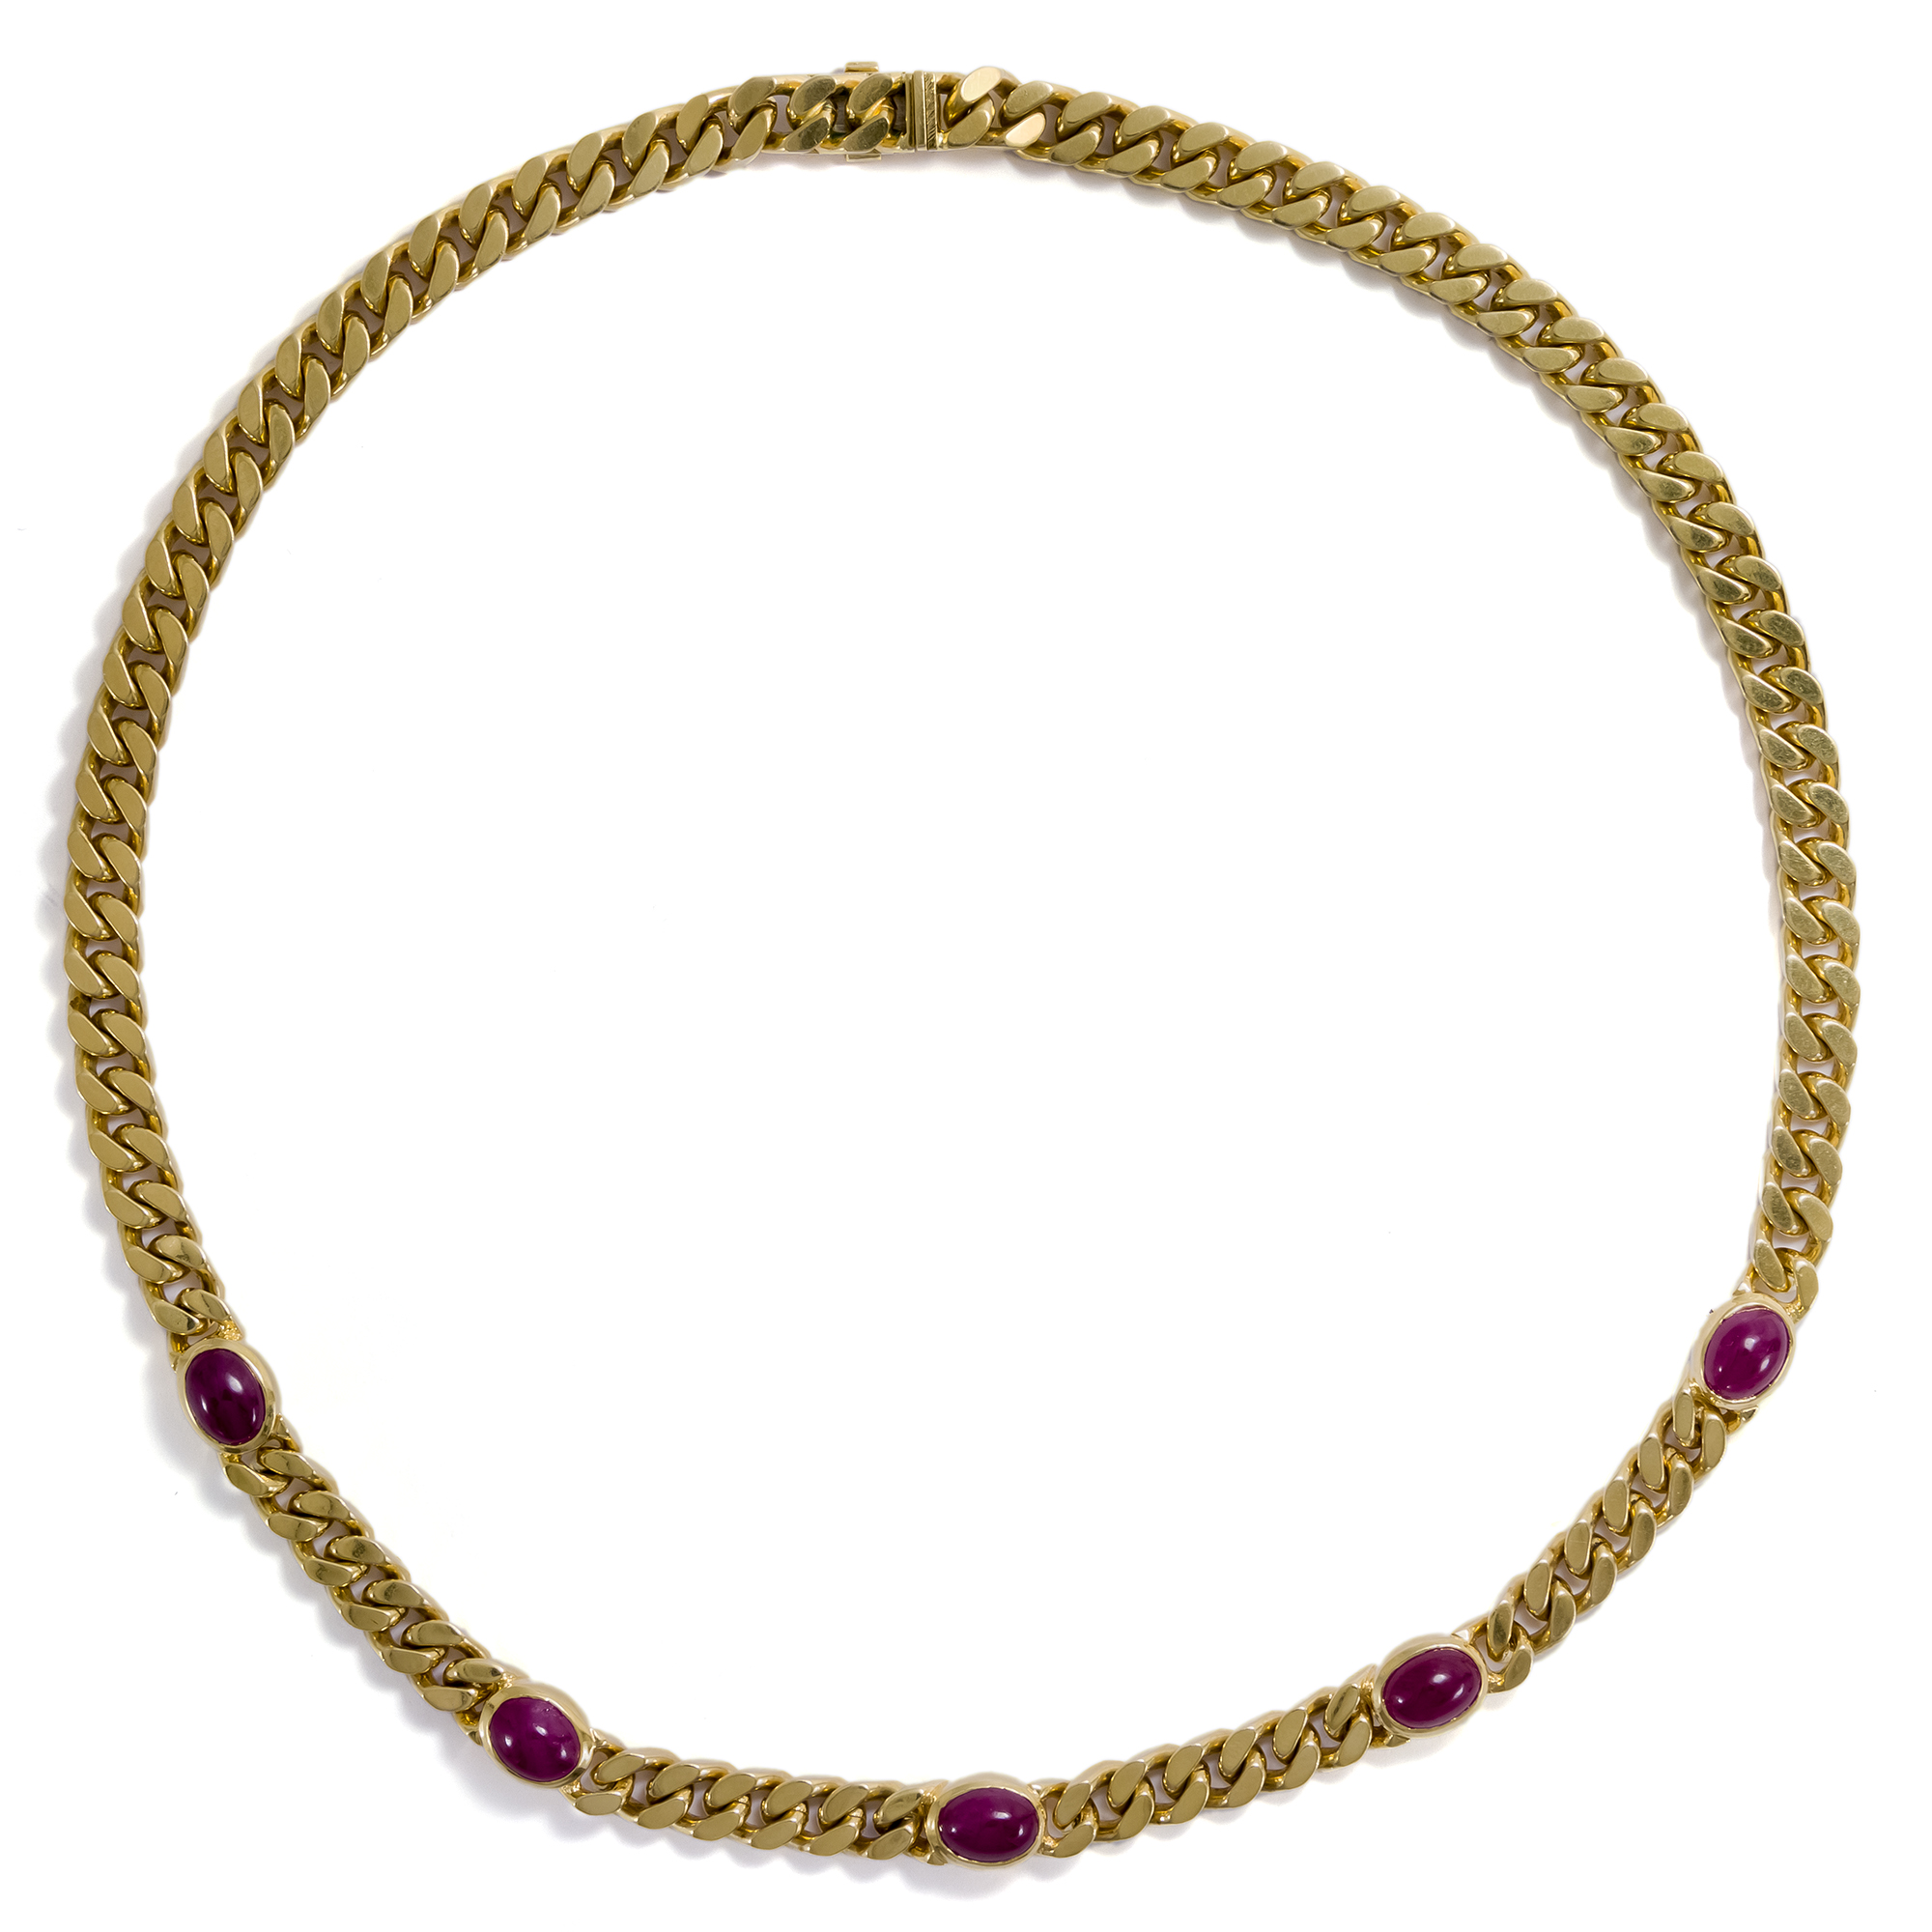 Solid Vintage Necklace of High Quality Gold & Rubies, Germany ca. 1990